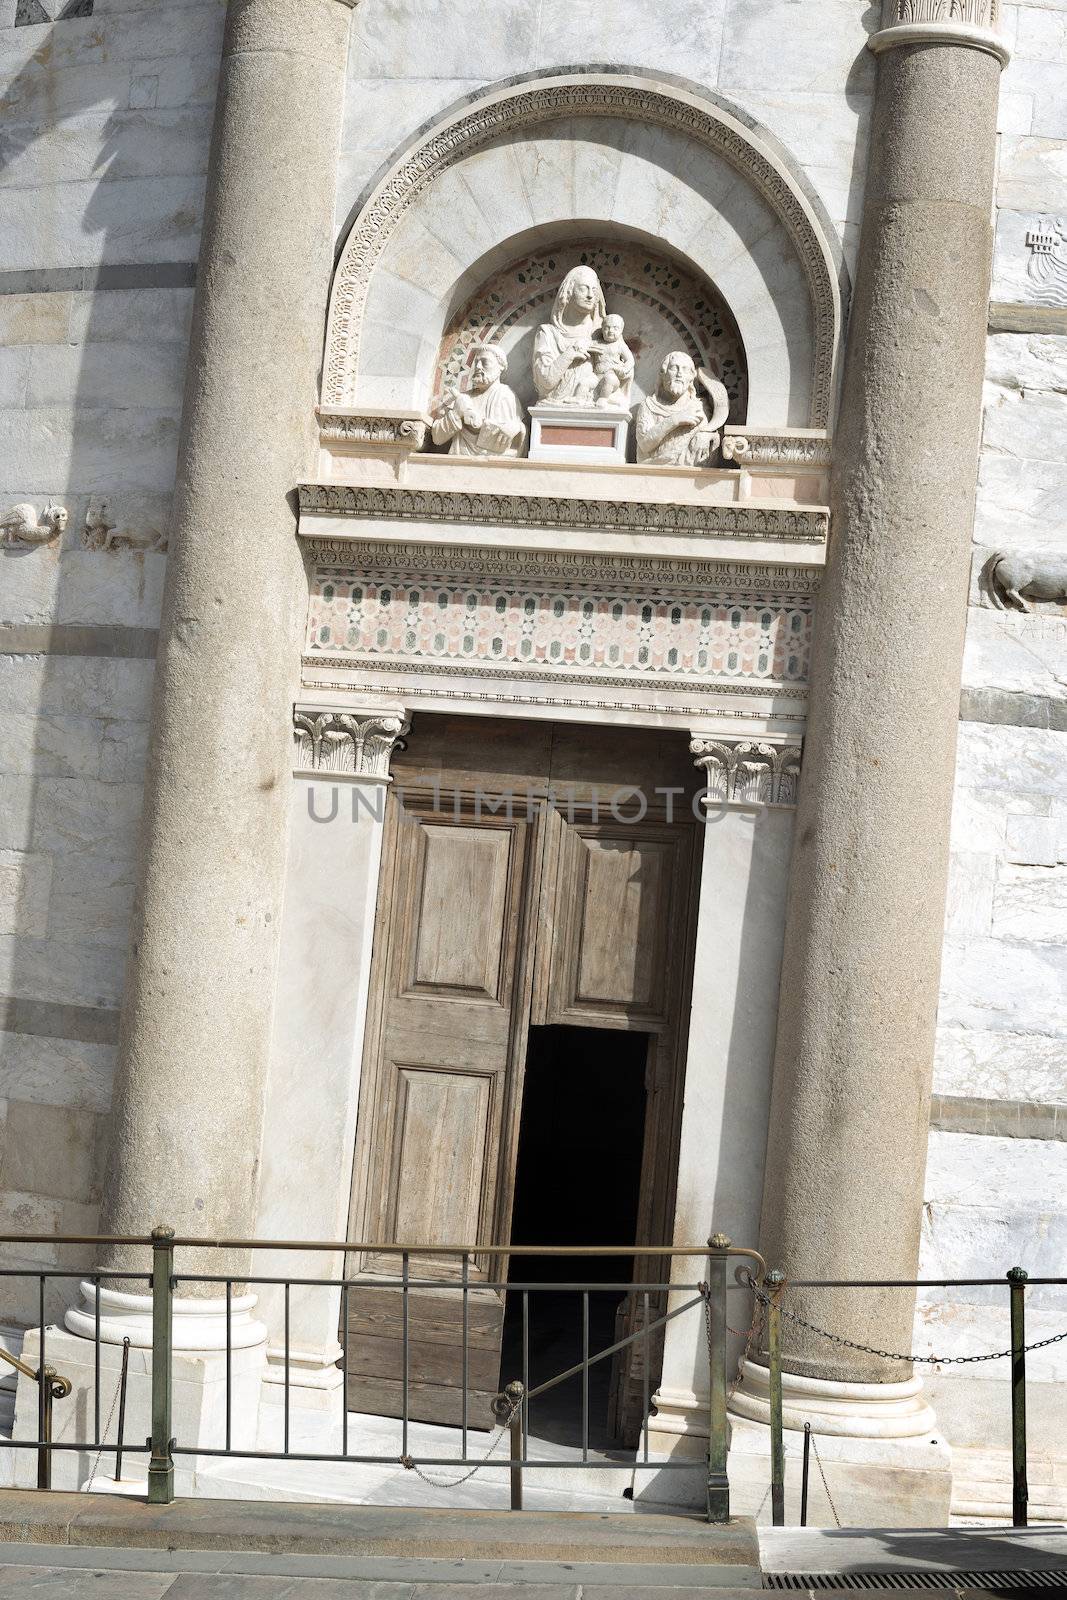 Picture of the entrance door of the Leaning Tower of Pisa